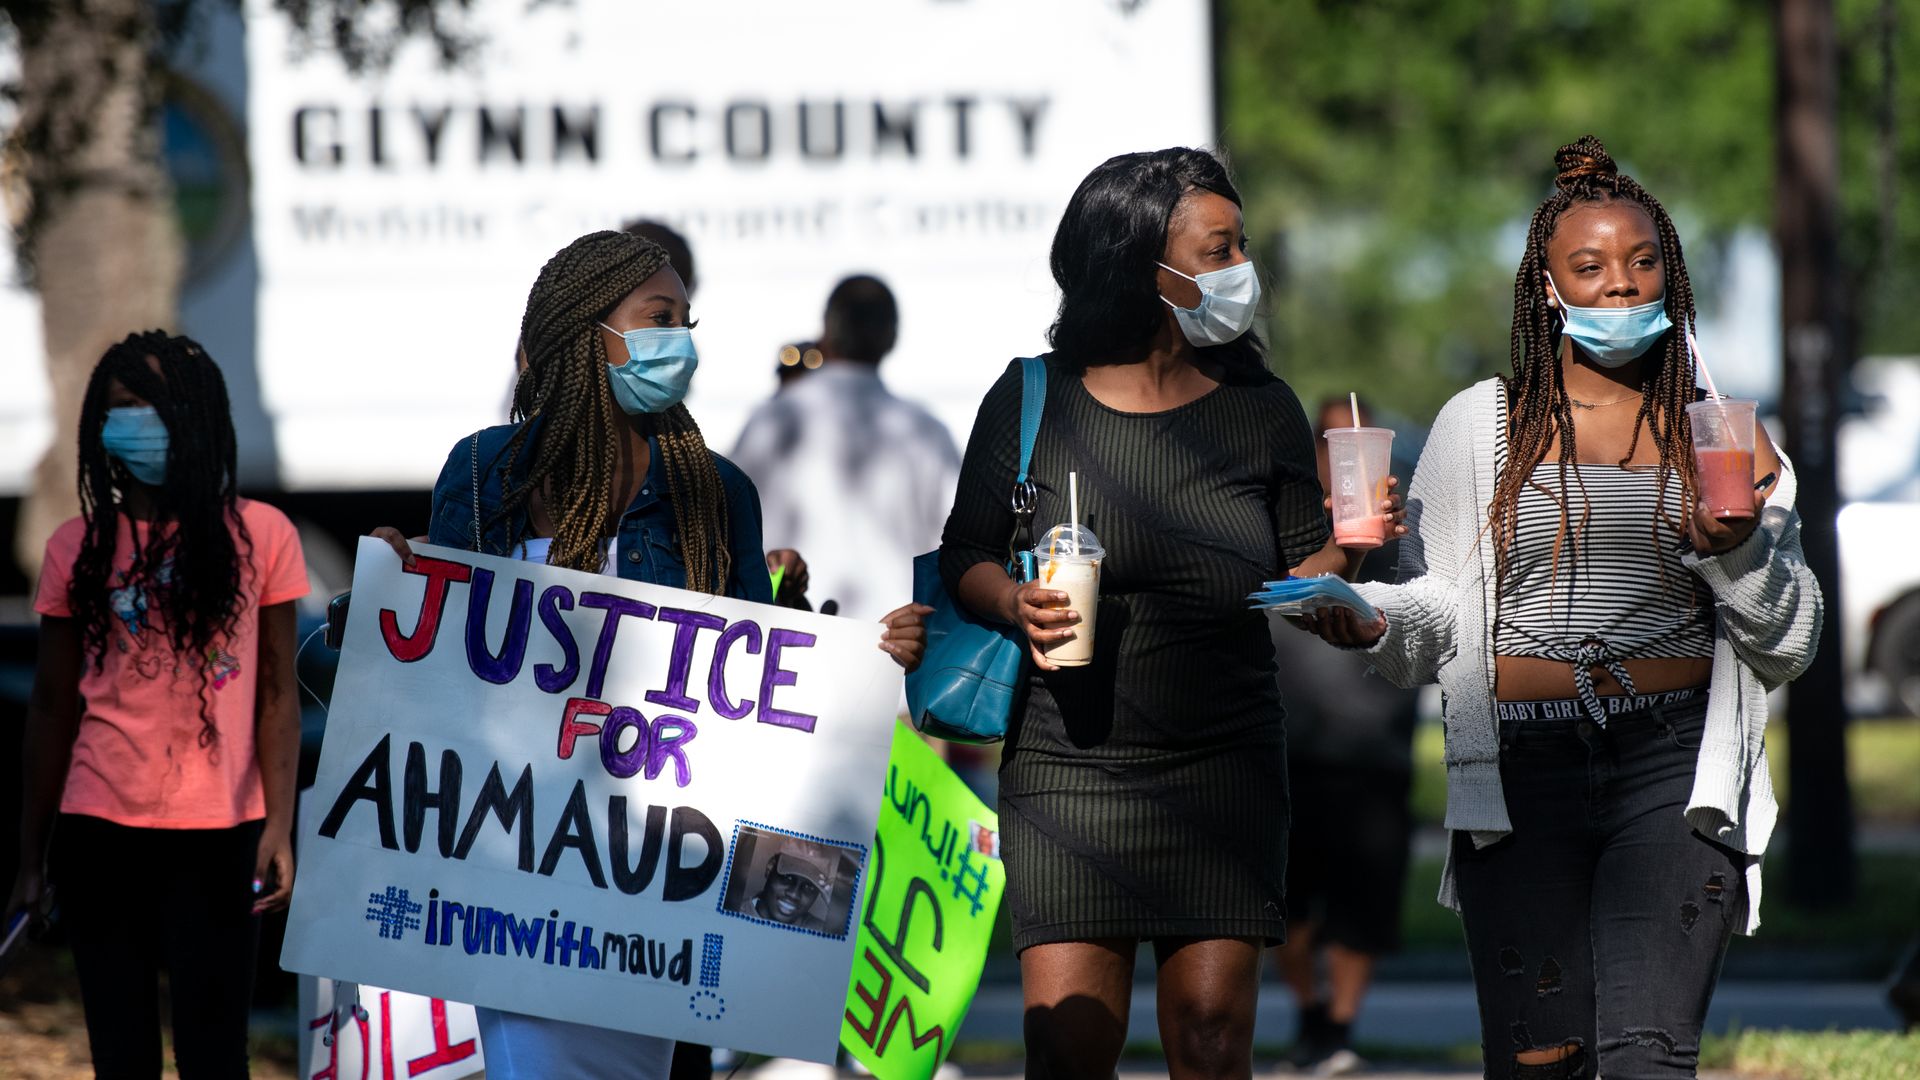 Demonstrators arrive to protest the shooting death of Ahmaud Arbery at the Glynn County Courthouse on May 8, 2020 in Brunswick, Georgia. 